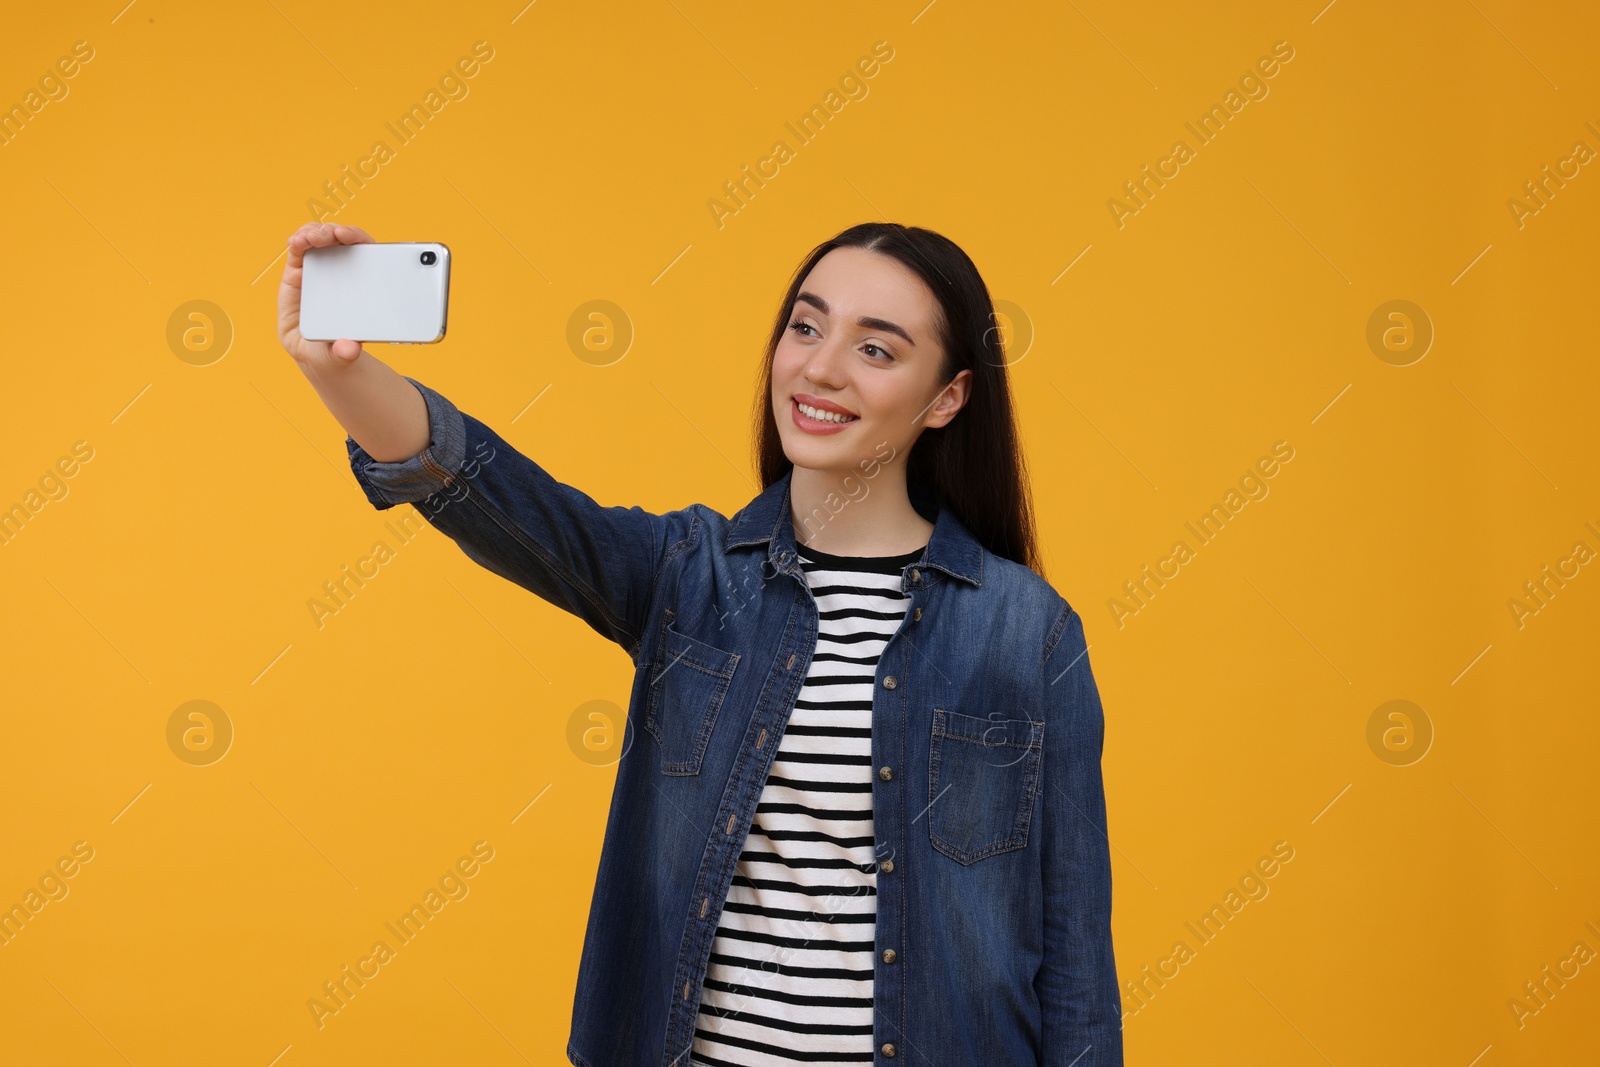 Photo of Smiling young woman taking selfie with smartphone on yellow background